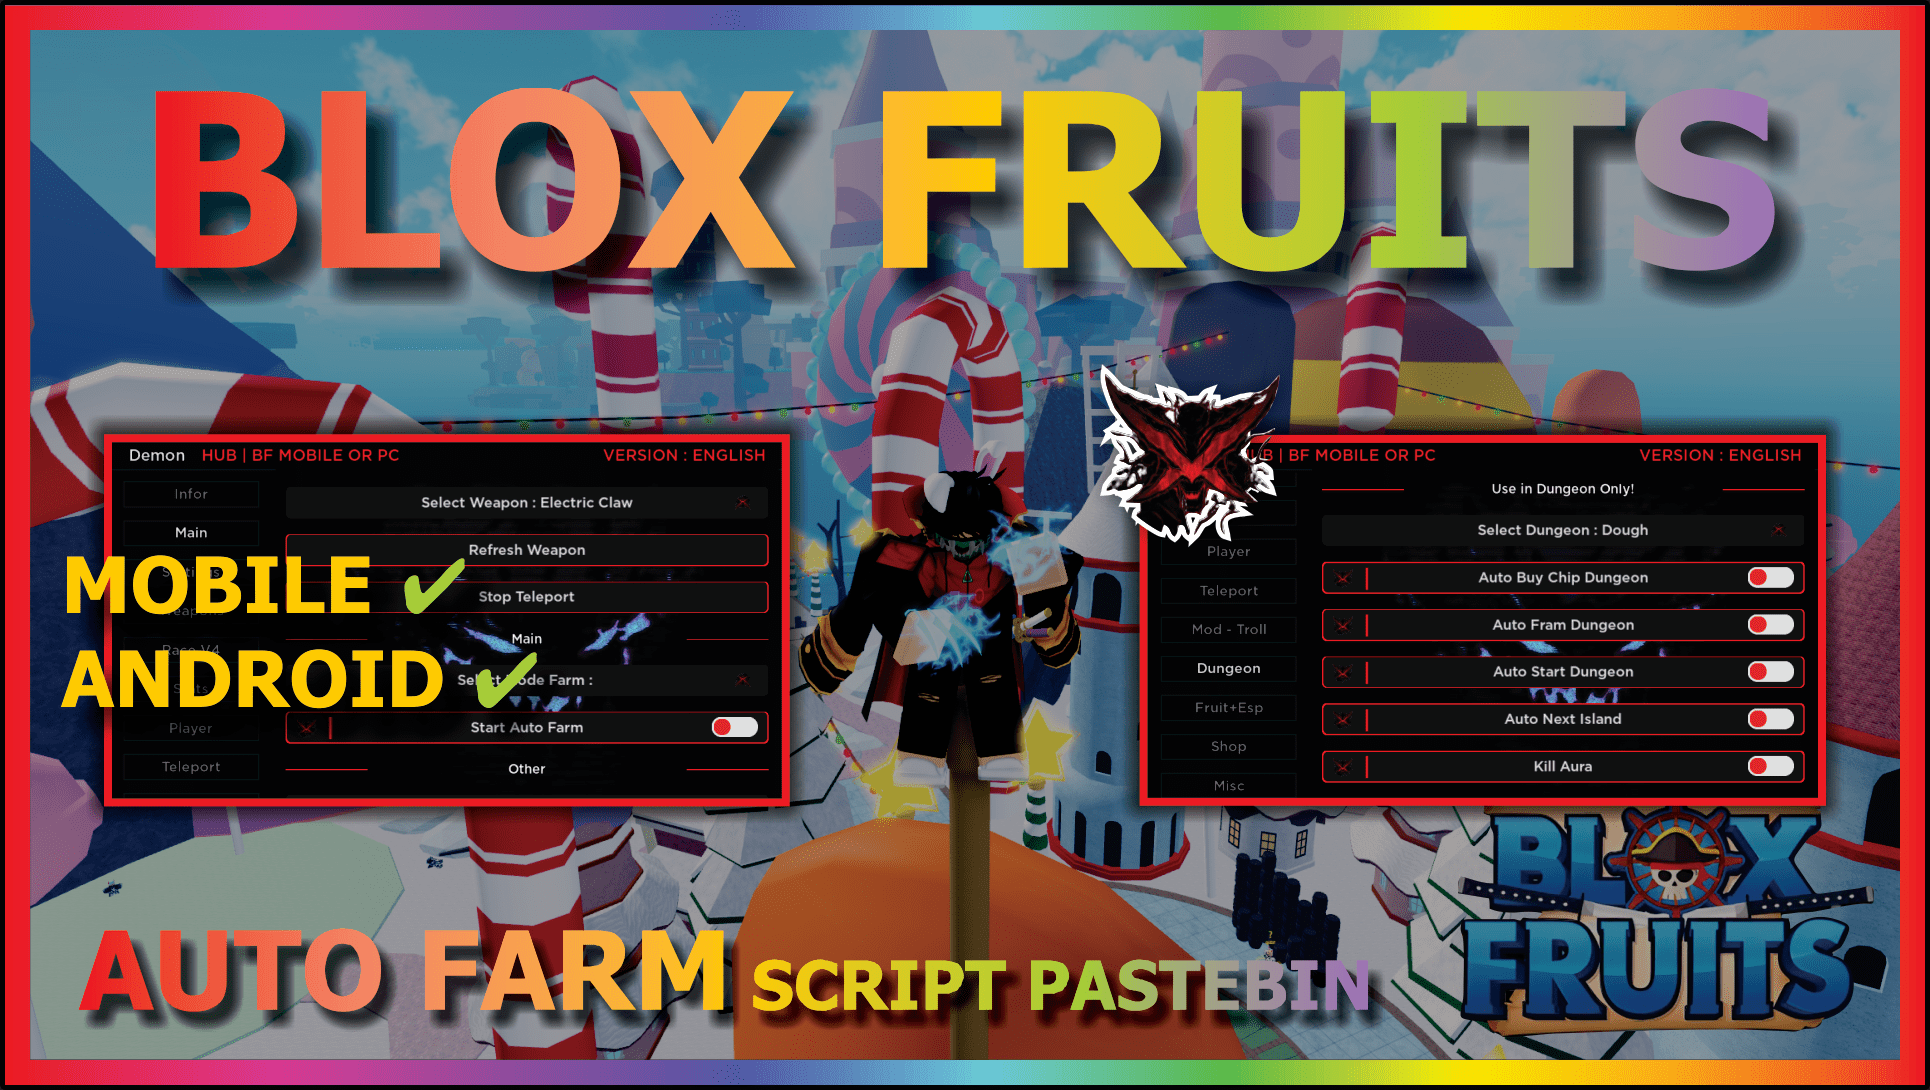 You are currently viewing BLOX FRUITS (DEMON)